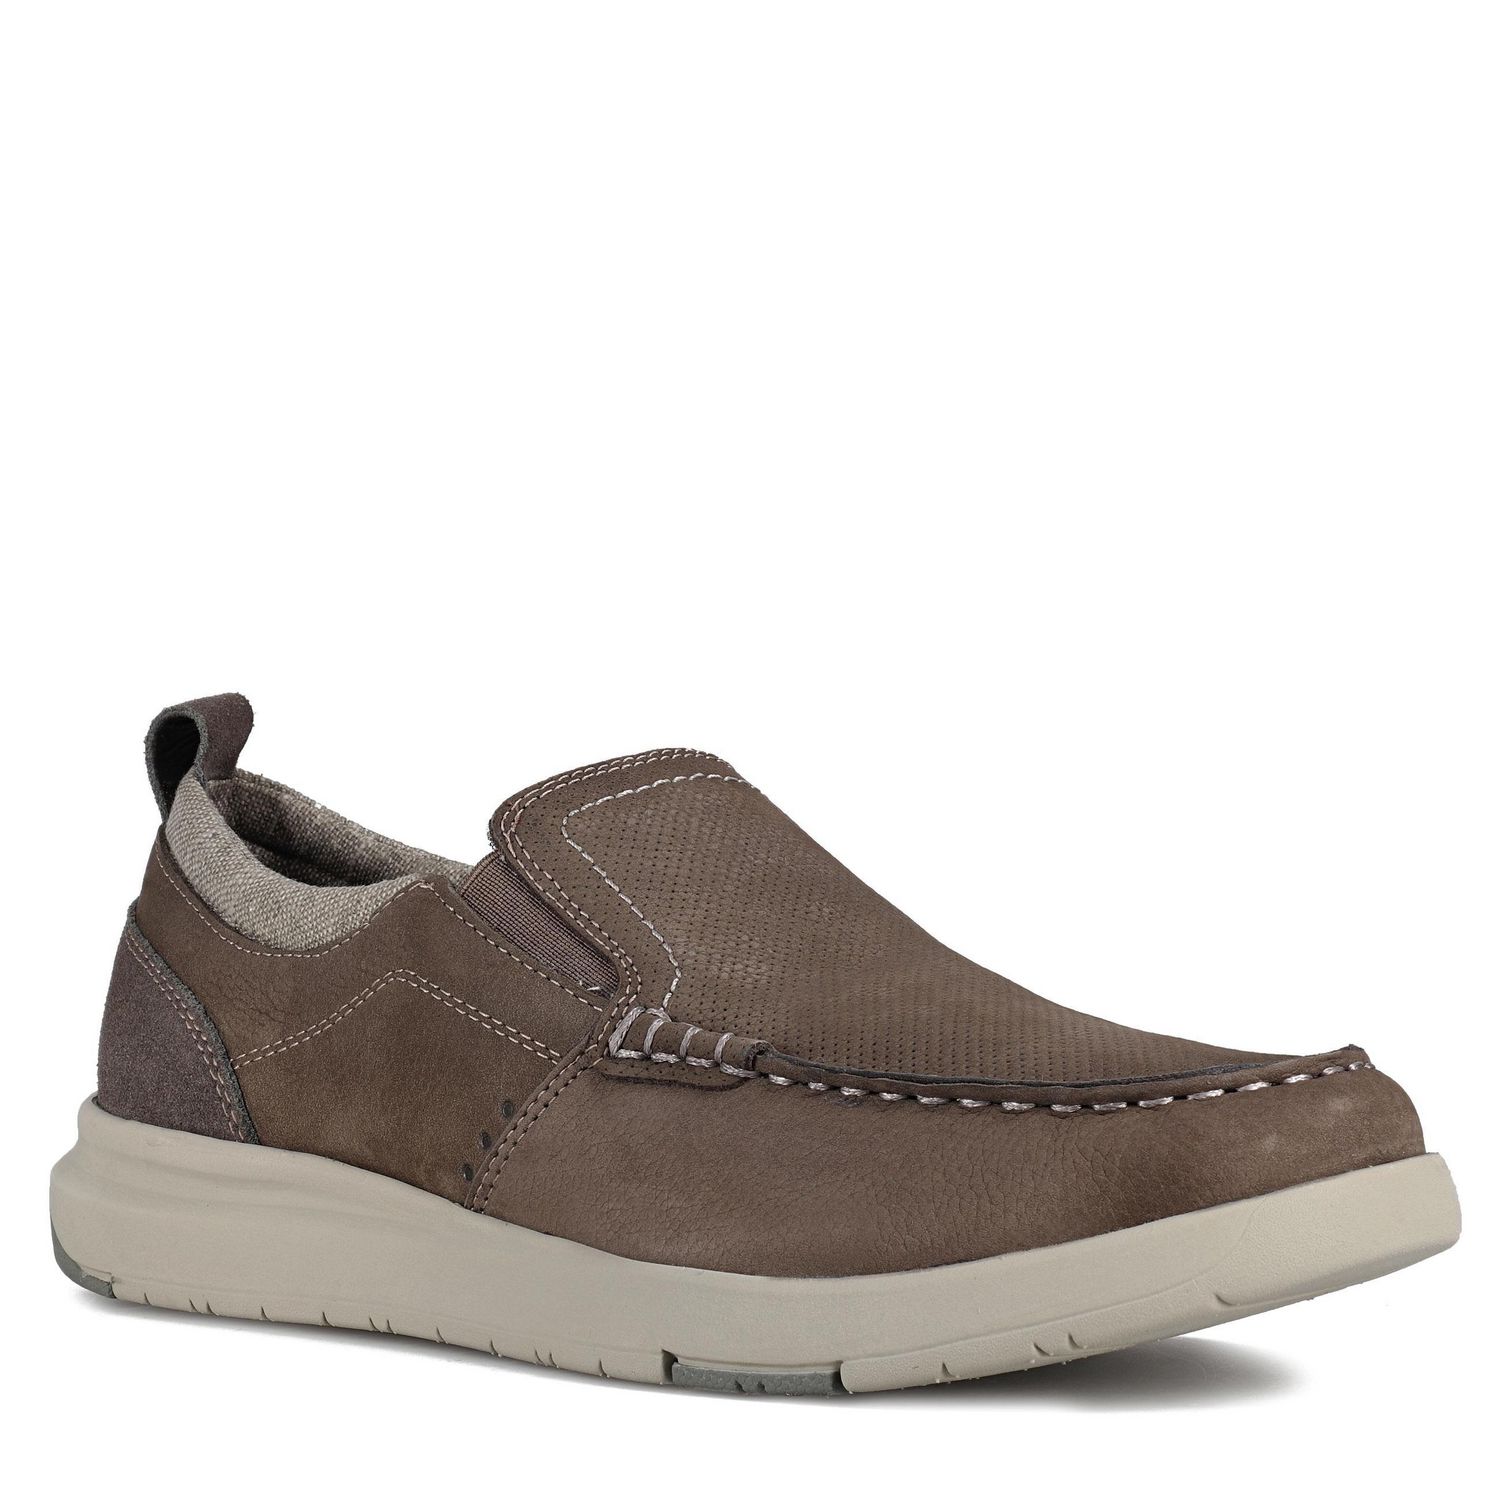 Dockers Mens Collins Leather Casual Loafer Shoe | Walmart Canada